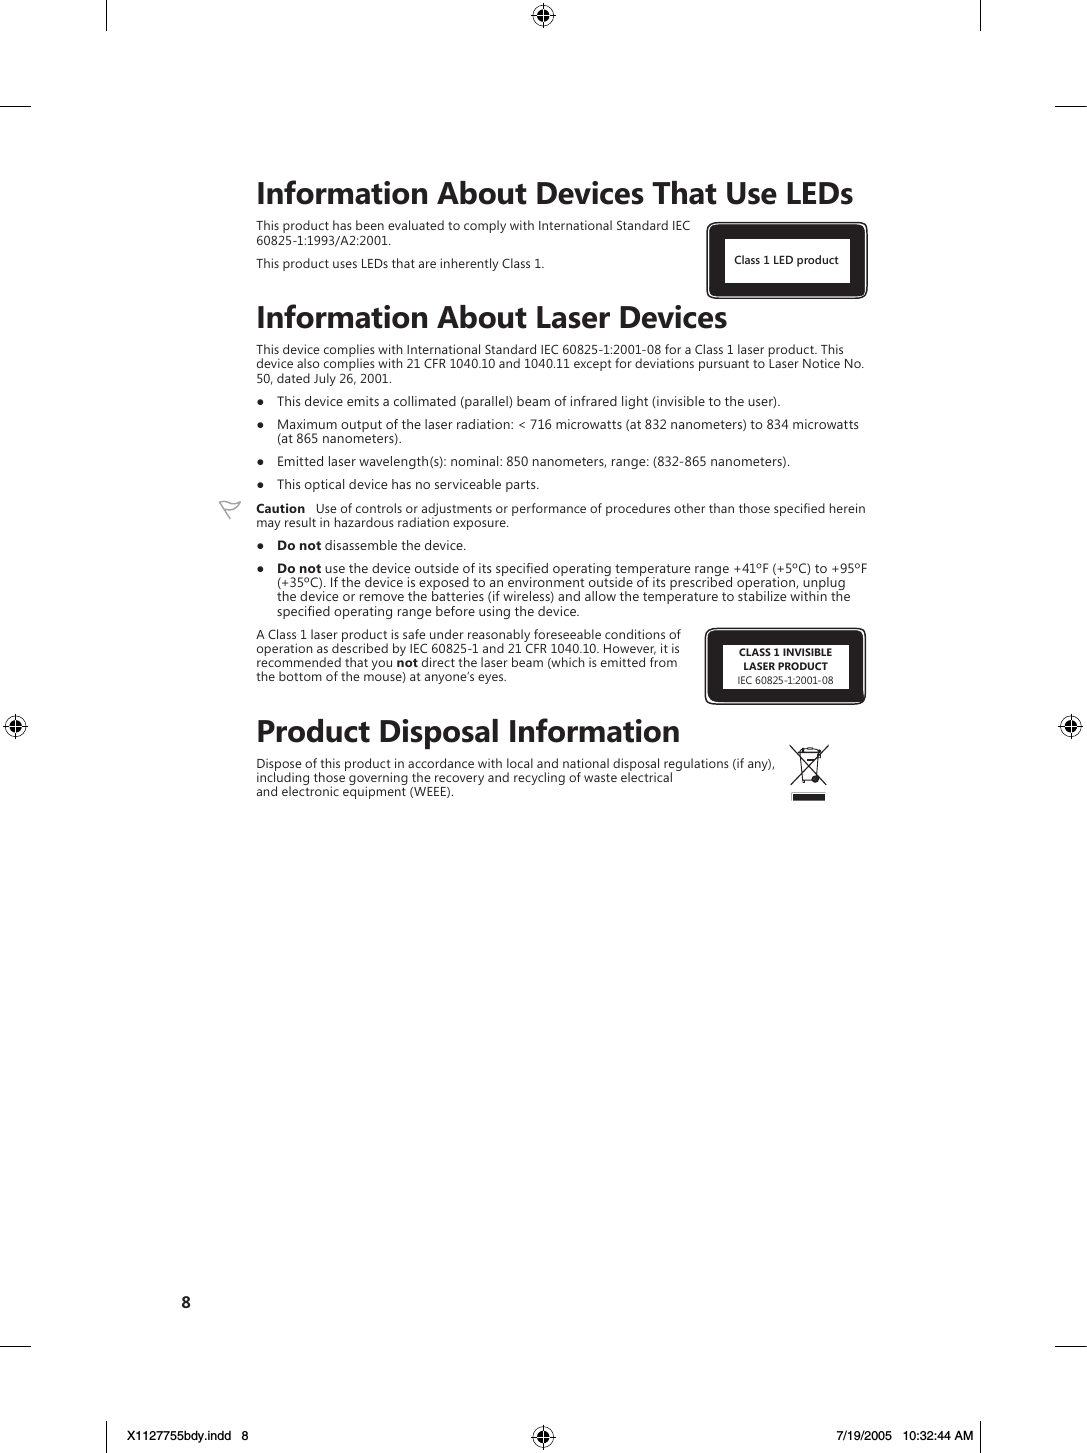 CLASS 1 INVISIBLELASER PRODUCTIEC 60825-1:2001-088Class 1 LED product    Information About Devices That Use LEDsThis product has been evaluated to comply with International Standard IEC  60825-1:1993/A2:2001.This product uses LEDs that are inherently Class 1.    Information About Laser DevicesThis device complies with International Standard IEC 60825-1:2001-08 for a Class 1 laser product. This device also complies with 21 CFR 1040.10 and 1040.11 except for deviations pursuant to Laser Notice No. 50, dated July 26, 2001. ●  This device emits a collimated (parallel) beam of infrared light (invisible to the user).●  Maximum output of the laser radiation: &lt; 716 microwatts (at 832 nanometers) to 834 microwatts (at 865 nanometers).●  Emitted laser wavelength(s): nominal: 850 nanometers, range: (832-865 nanometers).●  This optical device has no serviceable parts. Caution   Use of controls or adjustments or performance of procedures other than those speciﬁed herein may result in hazardous radiation exposure.●  Do not disassemble the device.●  Do not use the device outside of its speciﬁed operating temperature range +41ºF (+5ºC) to +95ºF (+35ºC). If the device is exposed to an environment outside of its prescribed operation, unplug the device or remove the batteries (if wireless) and allow the temperature to stabilize within the speciﬁed operating range before using the device.A Class 1 laser product is safe under reasonably foreseeable conditions of operation as described by IEC 60825-1 and 21 CFR 1040.10. However, it is recommended that you not direct the laser beam (which is emitted from the bottom of the mouse) at anyone’s eyes.    Product Disposal InformationDispose of this product in accordance with local and national disposal regulations (if any), including those governing the recovery and recycling of waste electrical and electronic equipment (WEEE).X1127755bdy.indd   8 7/19/2005   10:32:44 AM